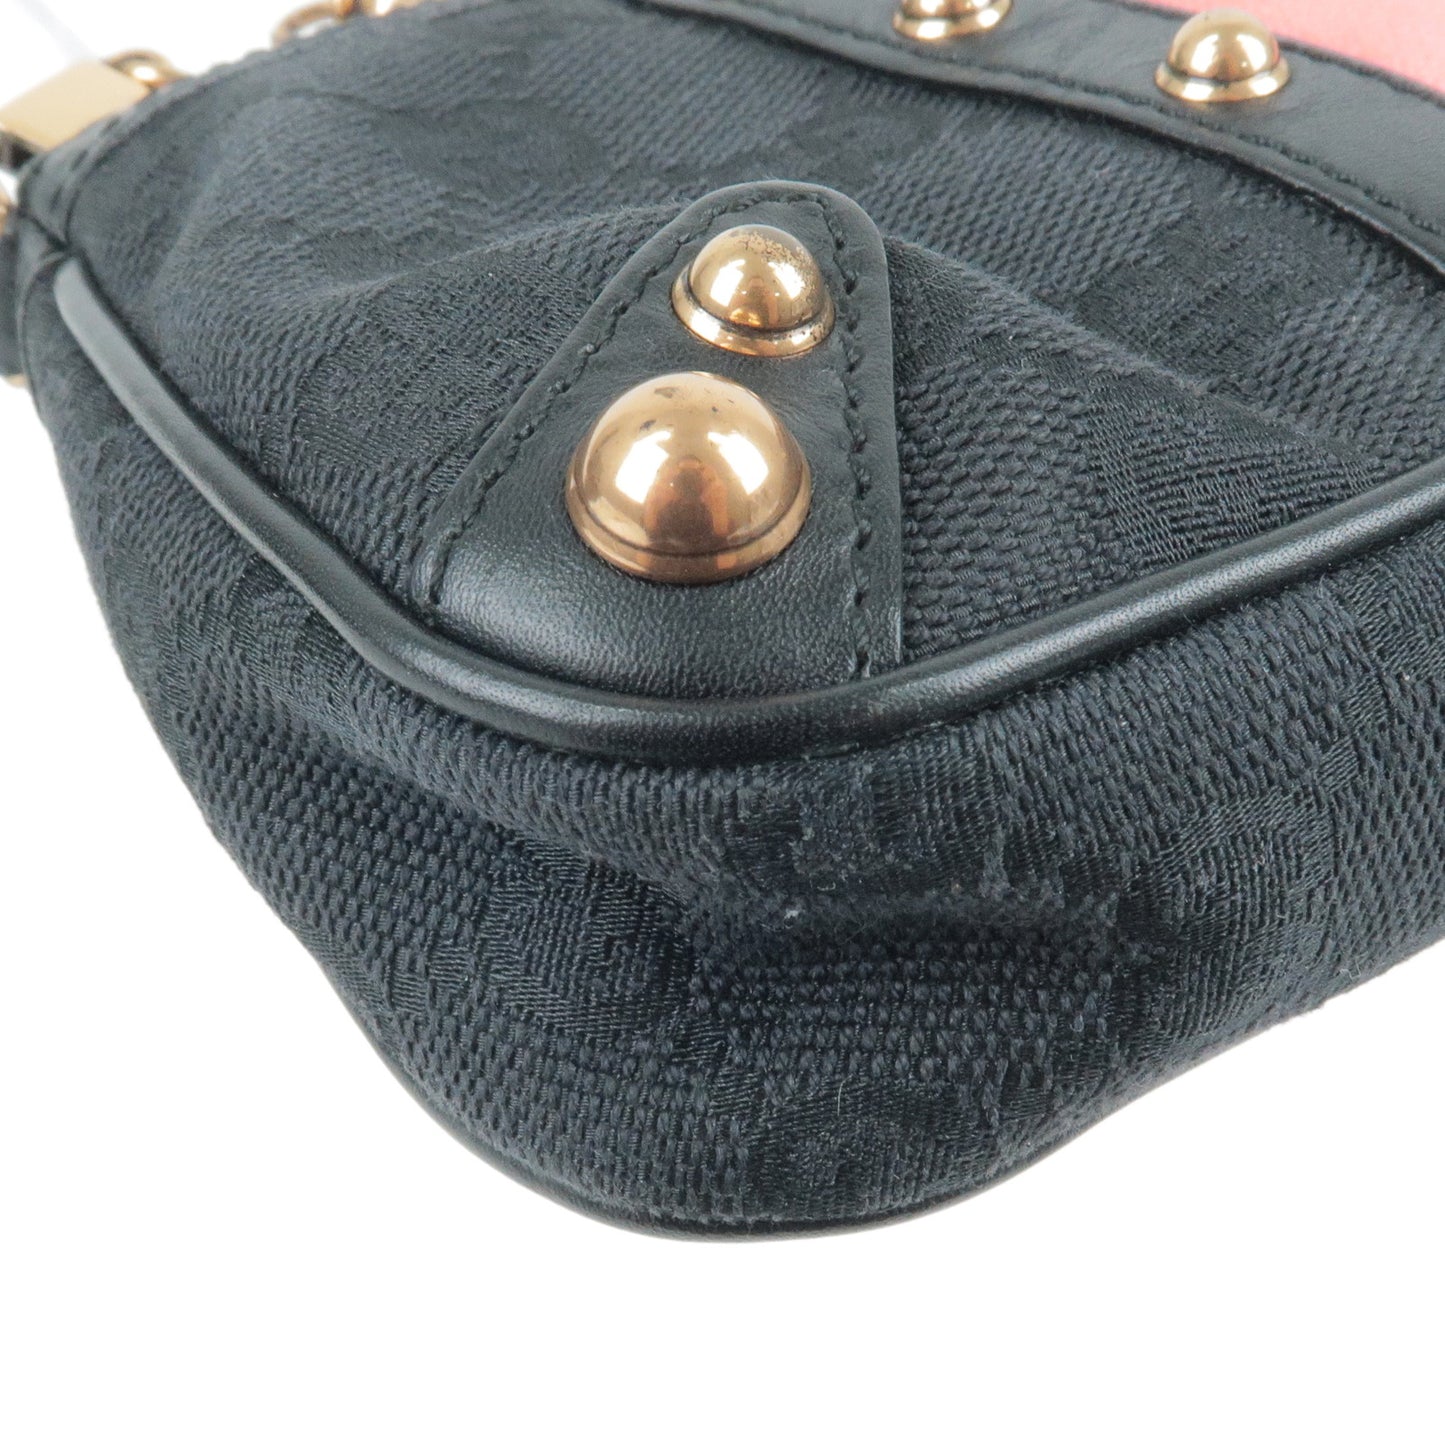 GUCCI Sherry Bamboo Canvas Leather Chain Hand Bag Black 129423